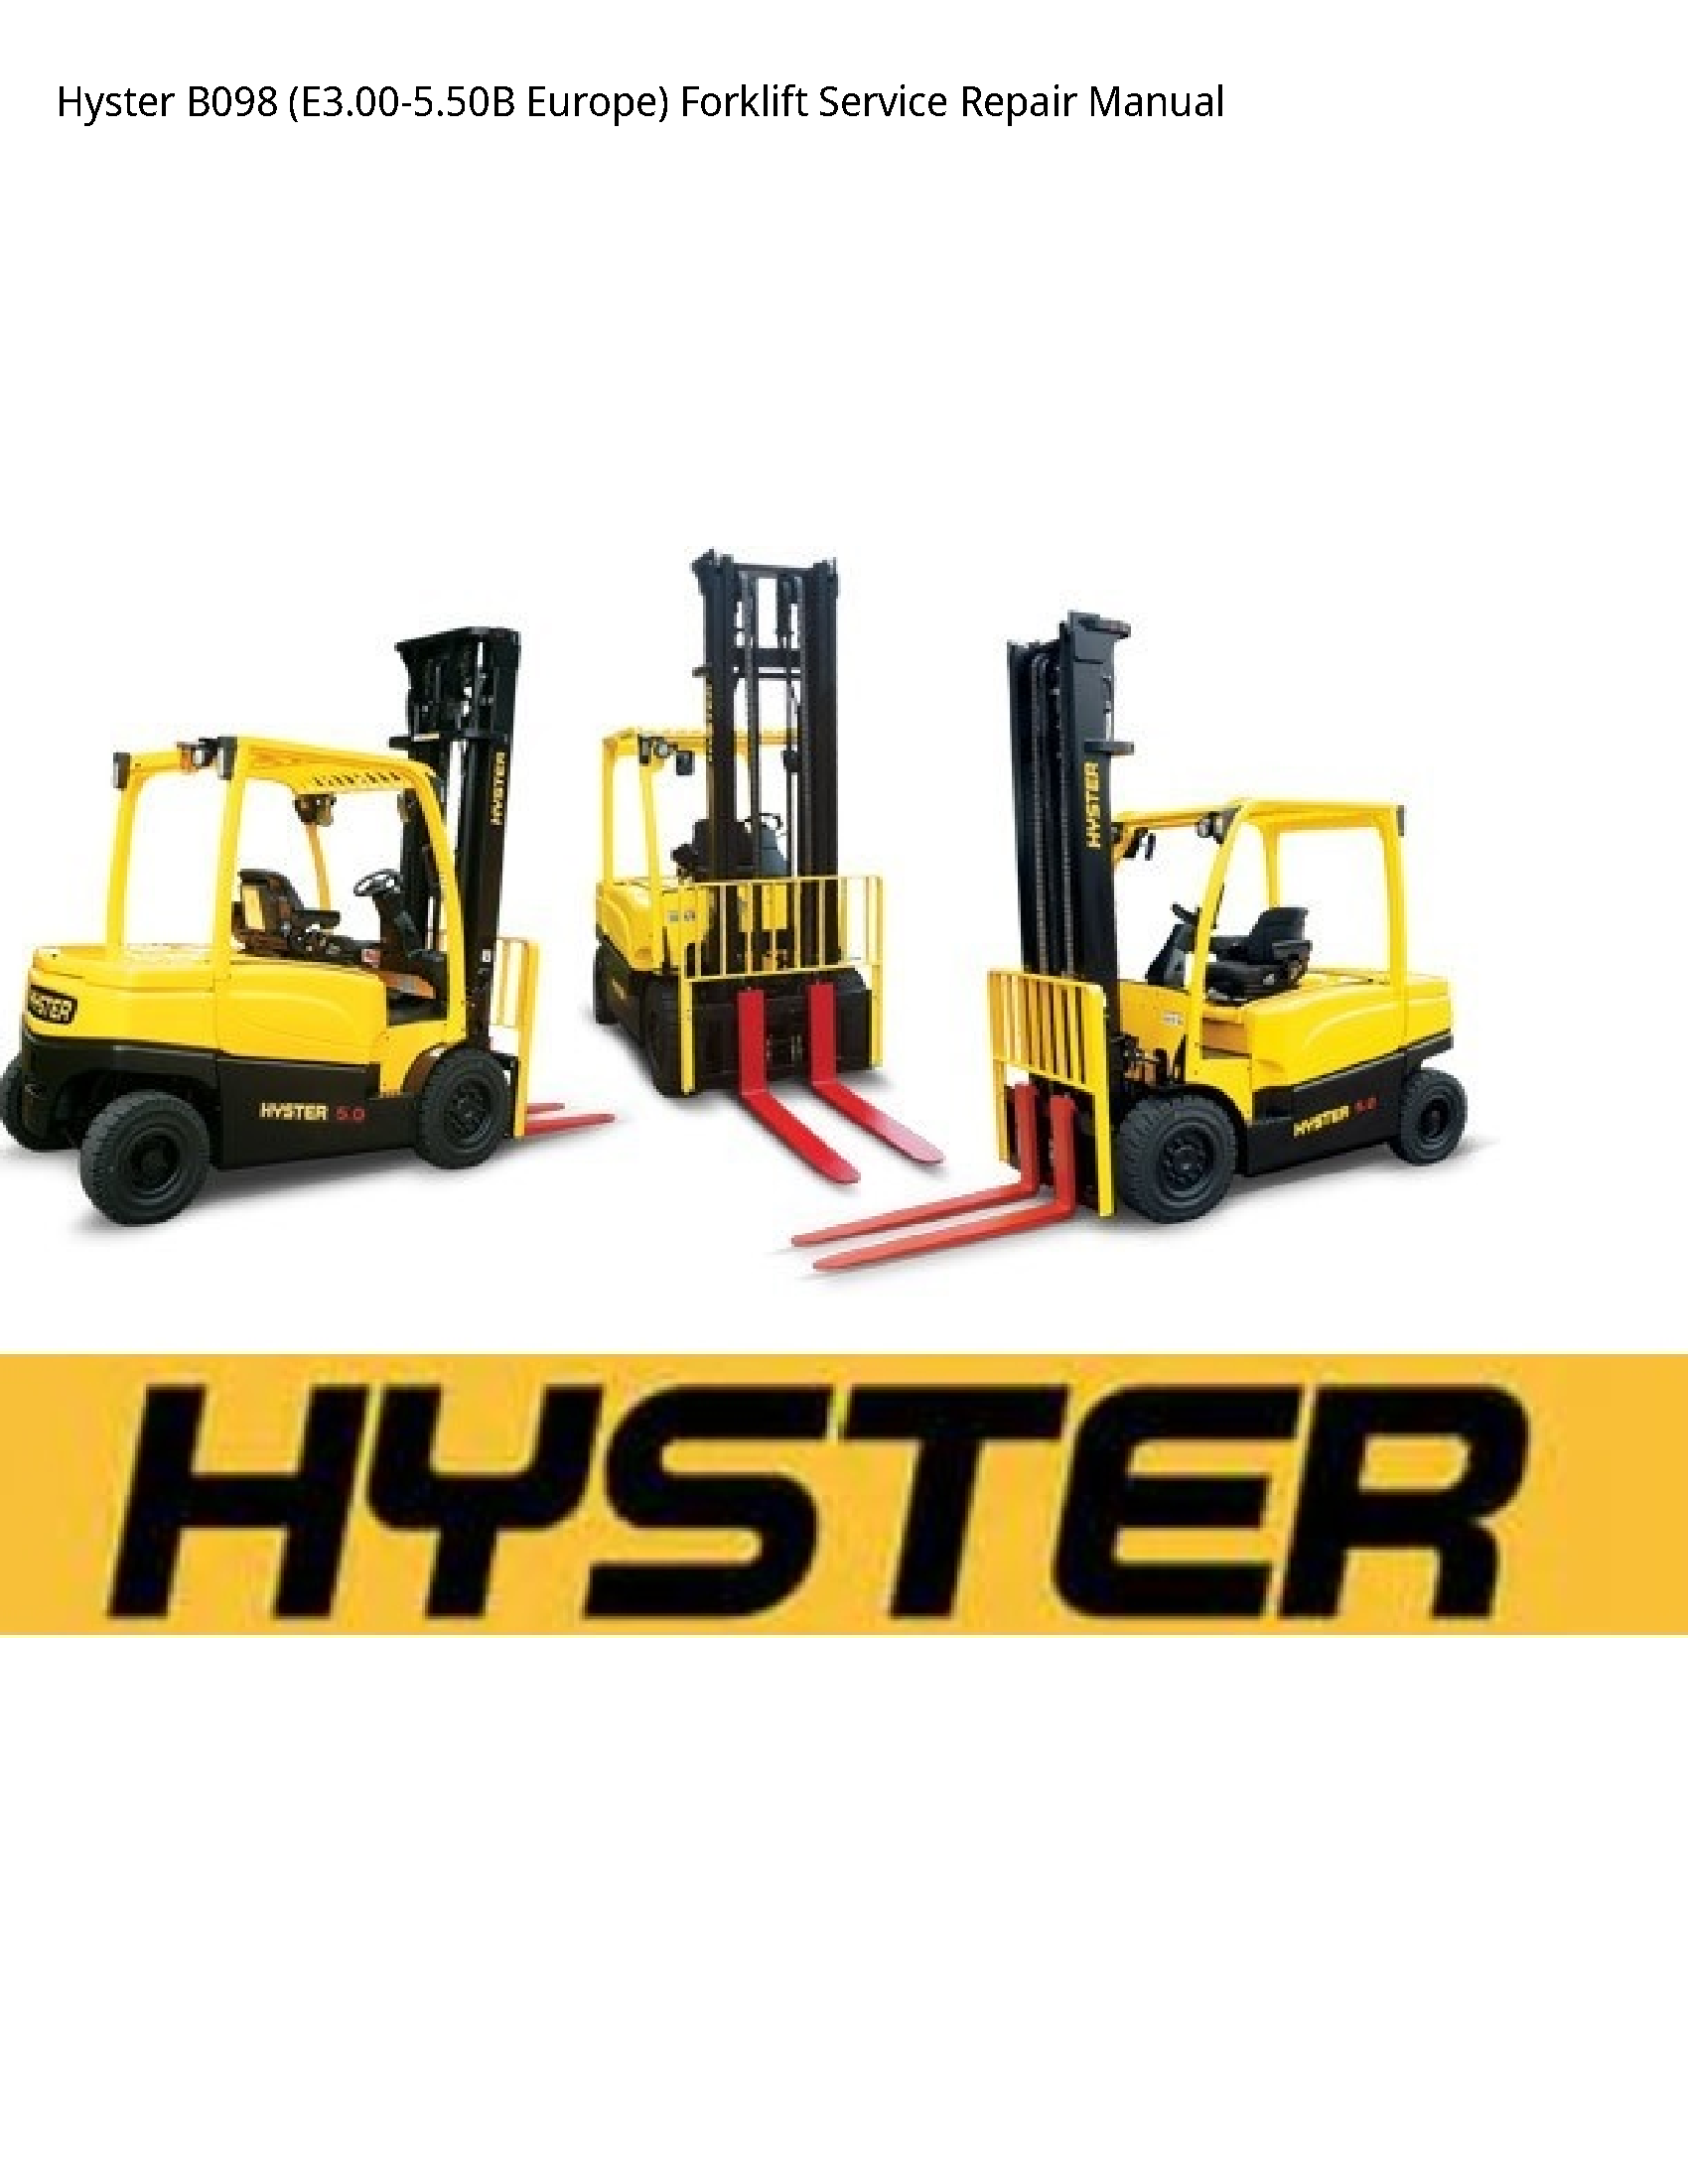 Hyster B098 Europe) Forklift manual